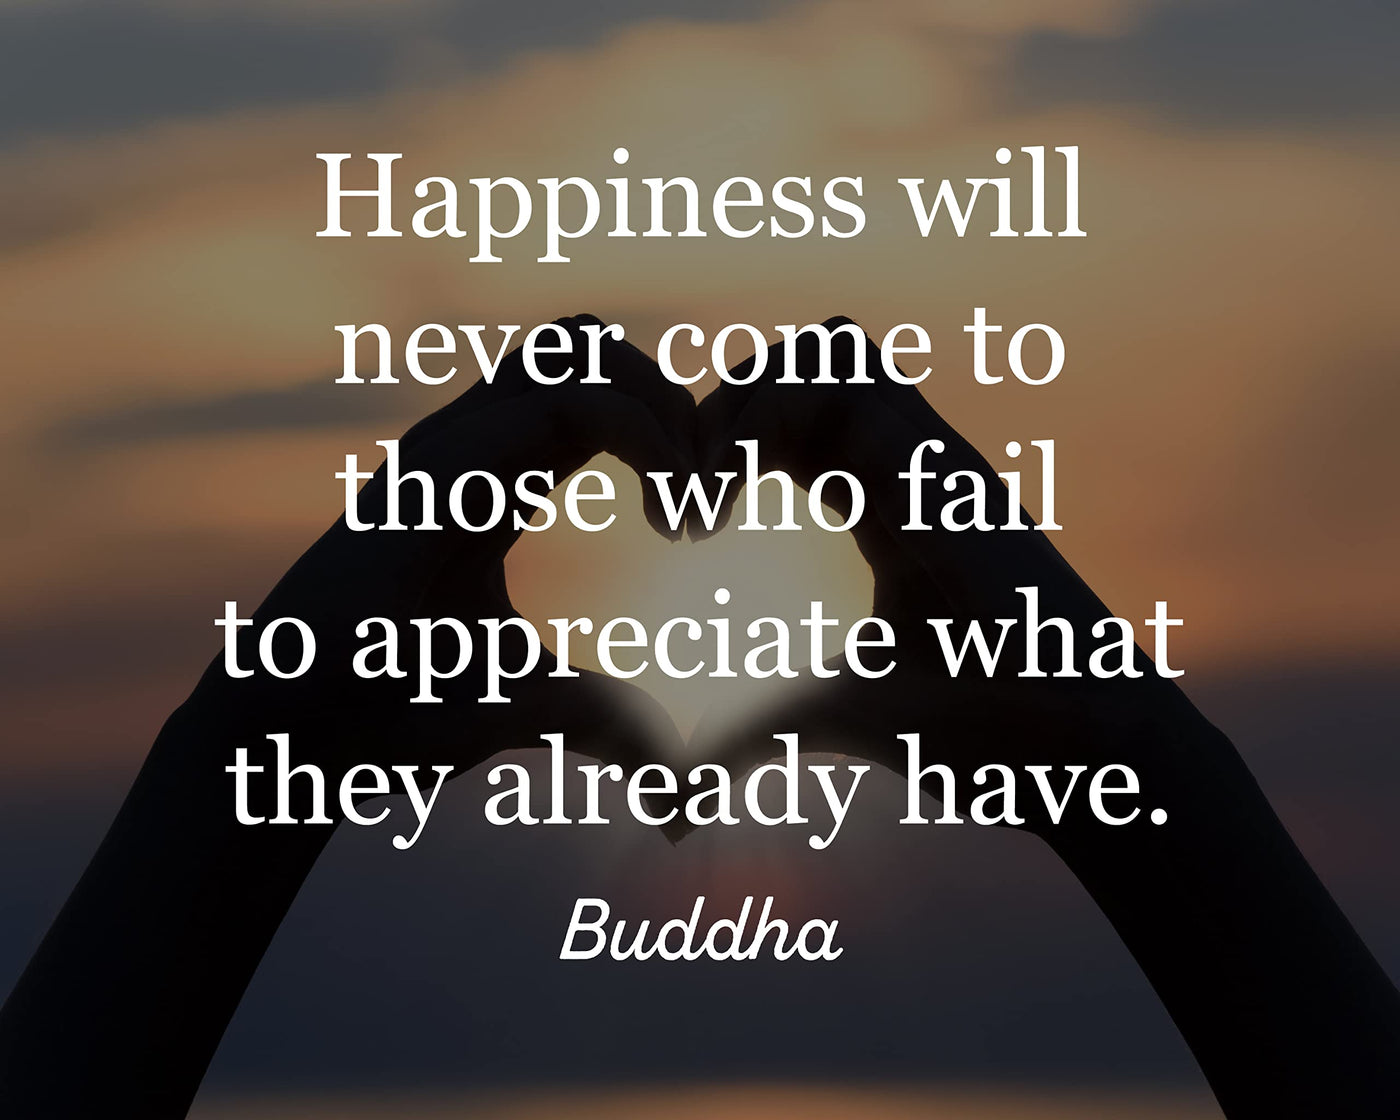 Buddha-"Happiness Never Comes" Spiritual Quotes Wall Art- 10 x 8" Modern Inspirational Wall Print -Ready to Frame. Positive Home-Yoga Studio-Office Decor for Mindfulness. Great Zen Gift & Reminder!